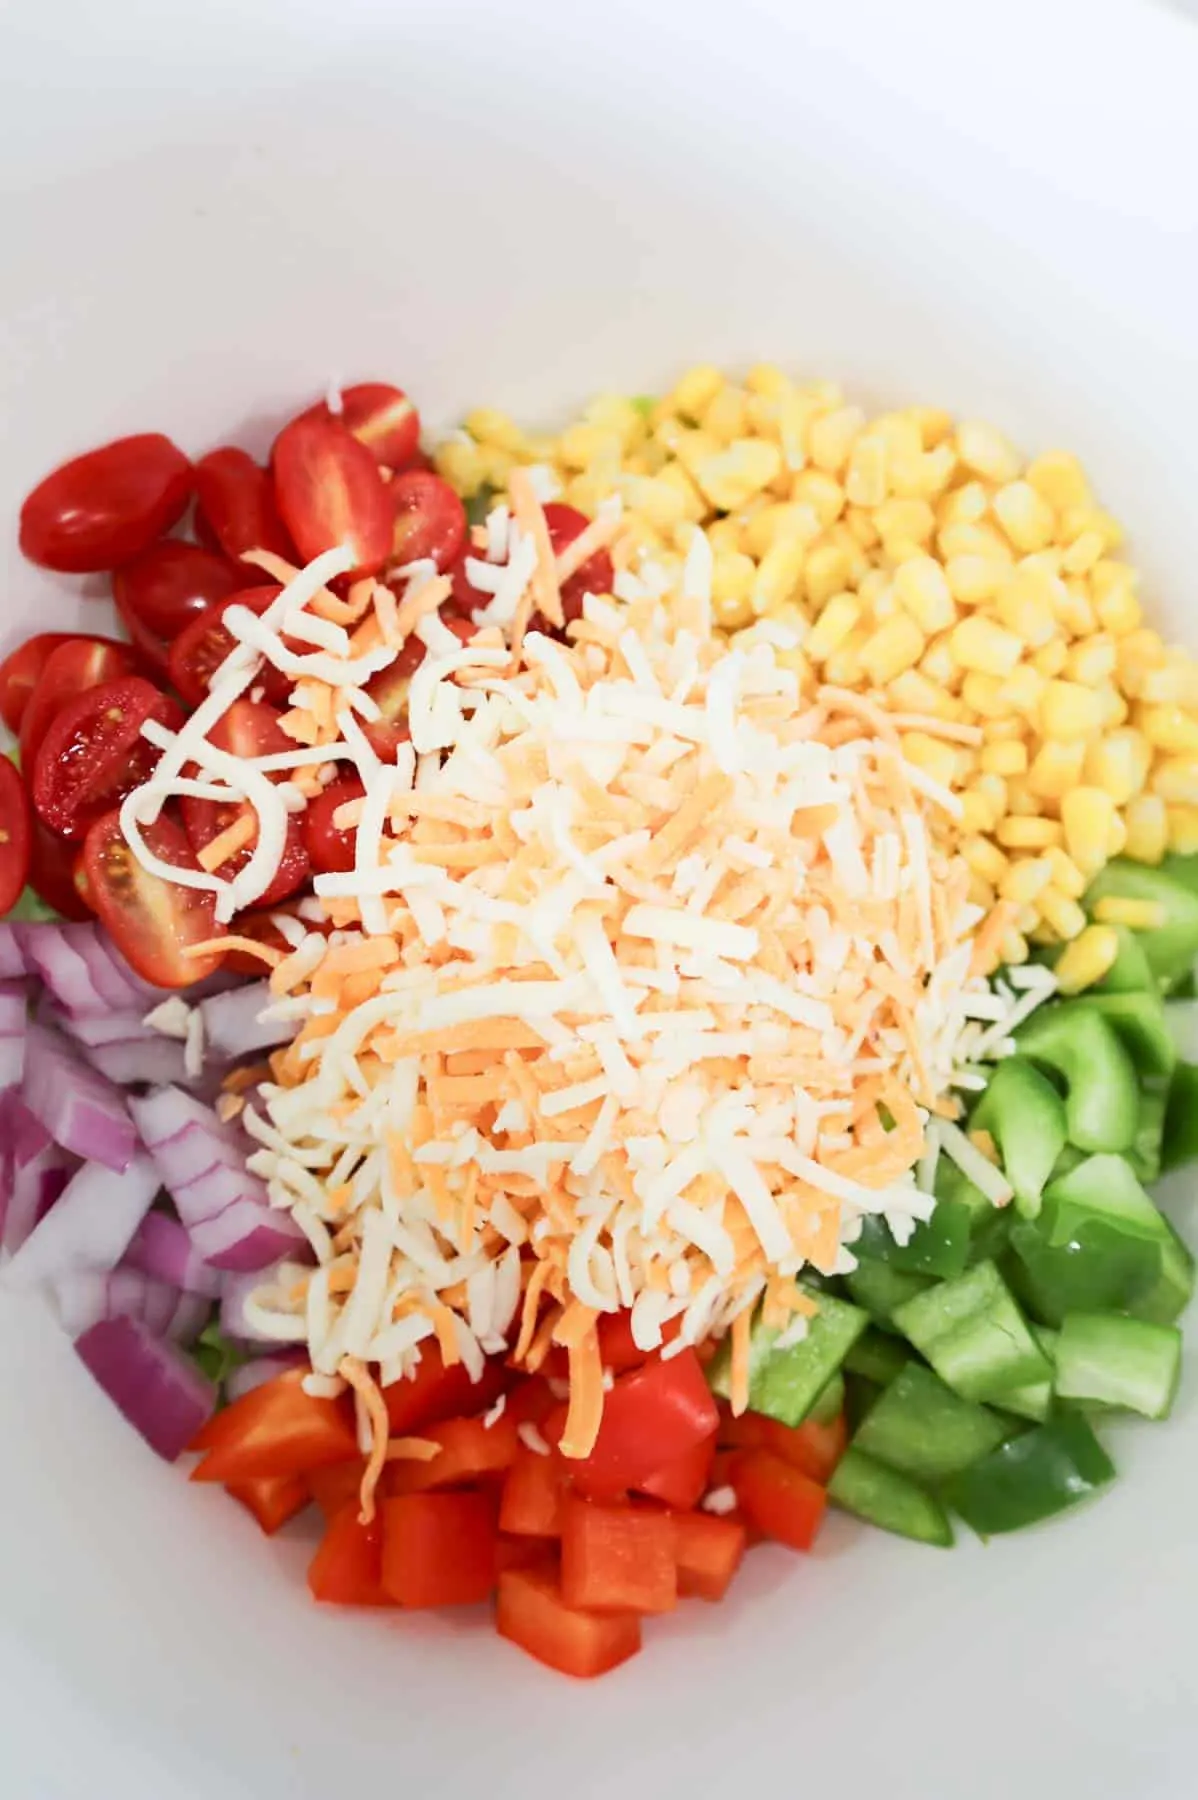 shredded cheese, halved grape tomatoes, red onions, red and green bell peppers and corn in a bowl